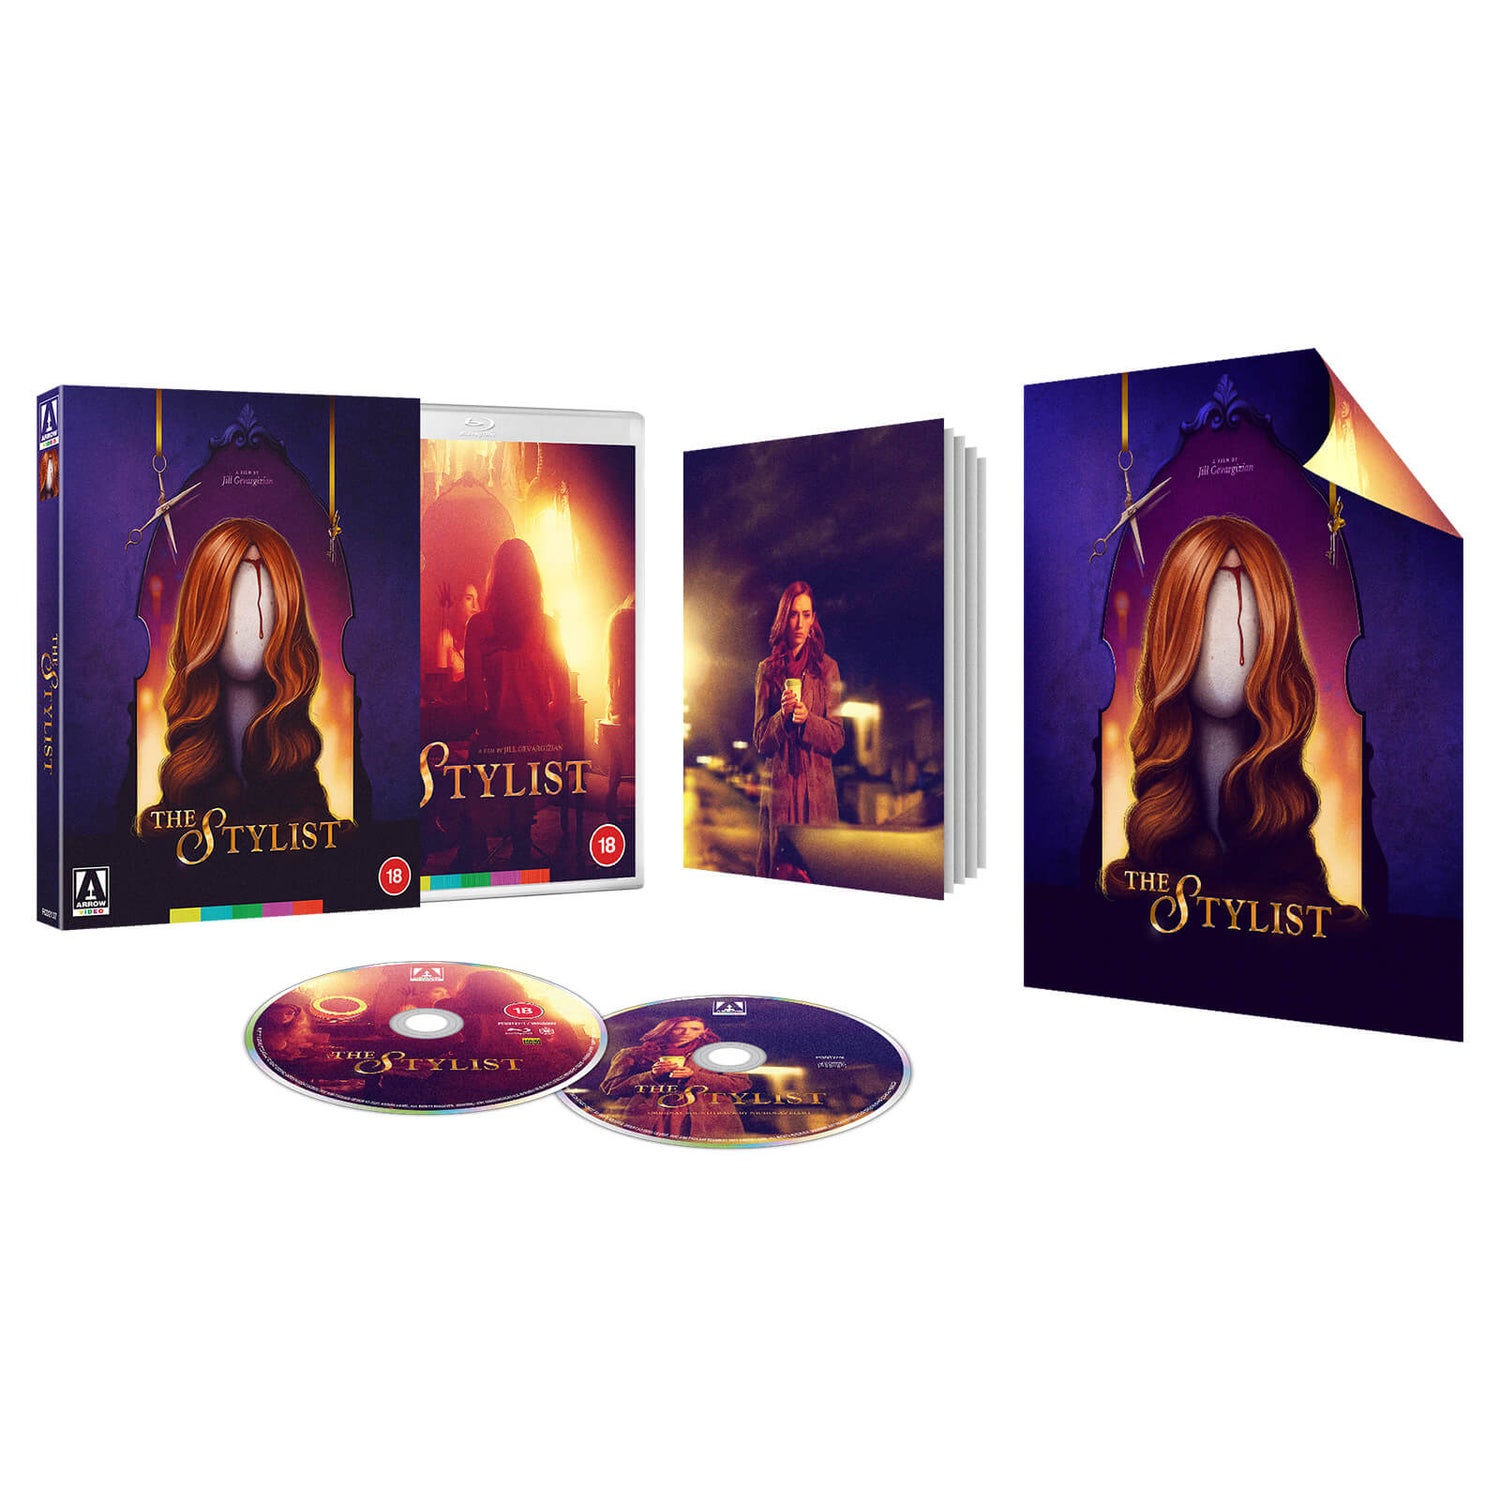 The Stylist Limited Edition Blu-ray+CD